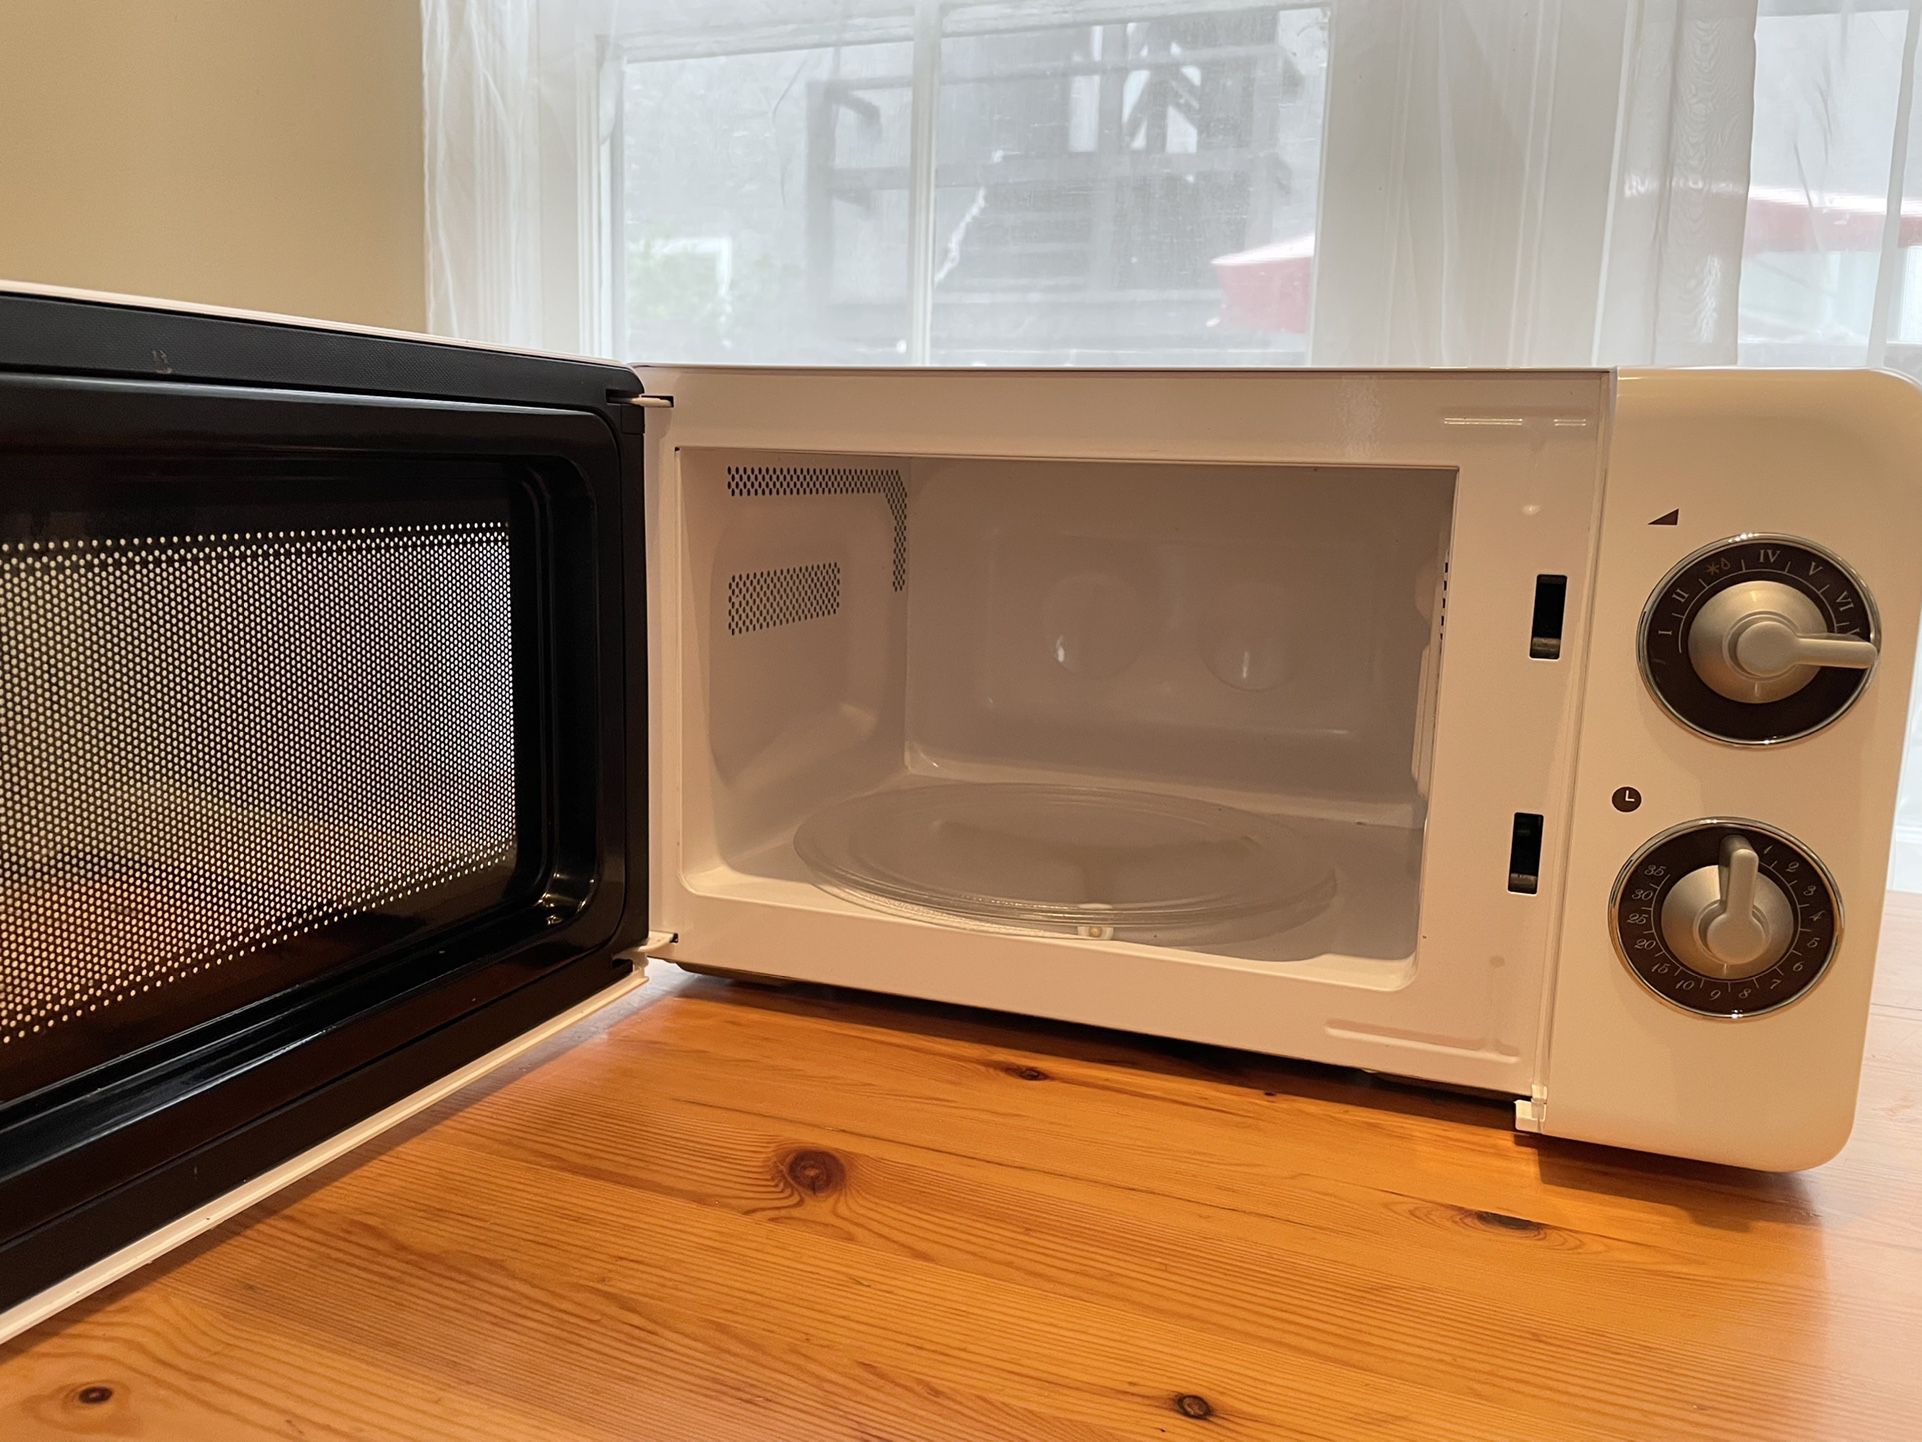 Cute Retro Mint Green Microwave for Sale in San Diego, CA - OfferUp